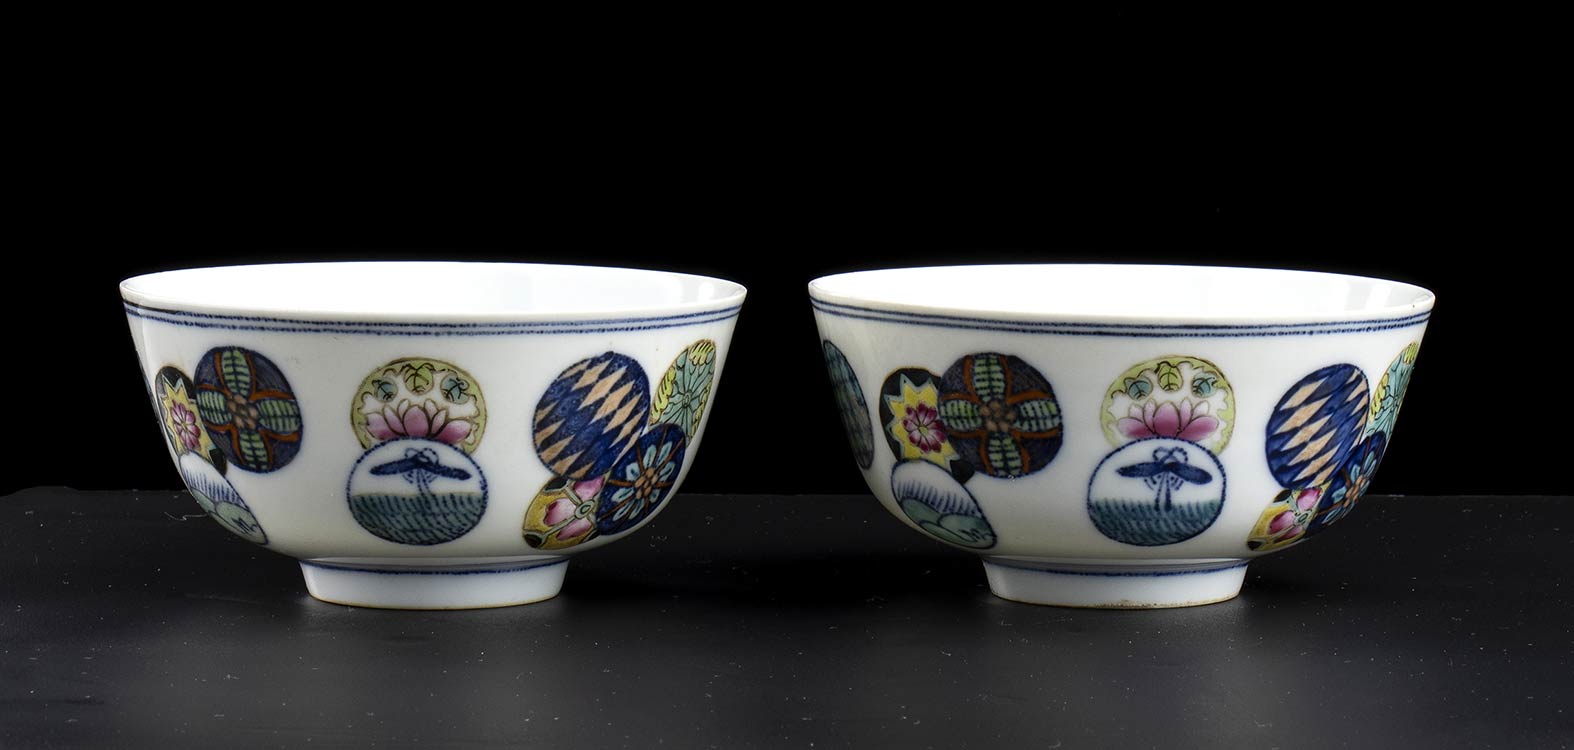 A PAIR OF POLYCHROME ENAMELED ... 